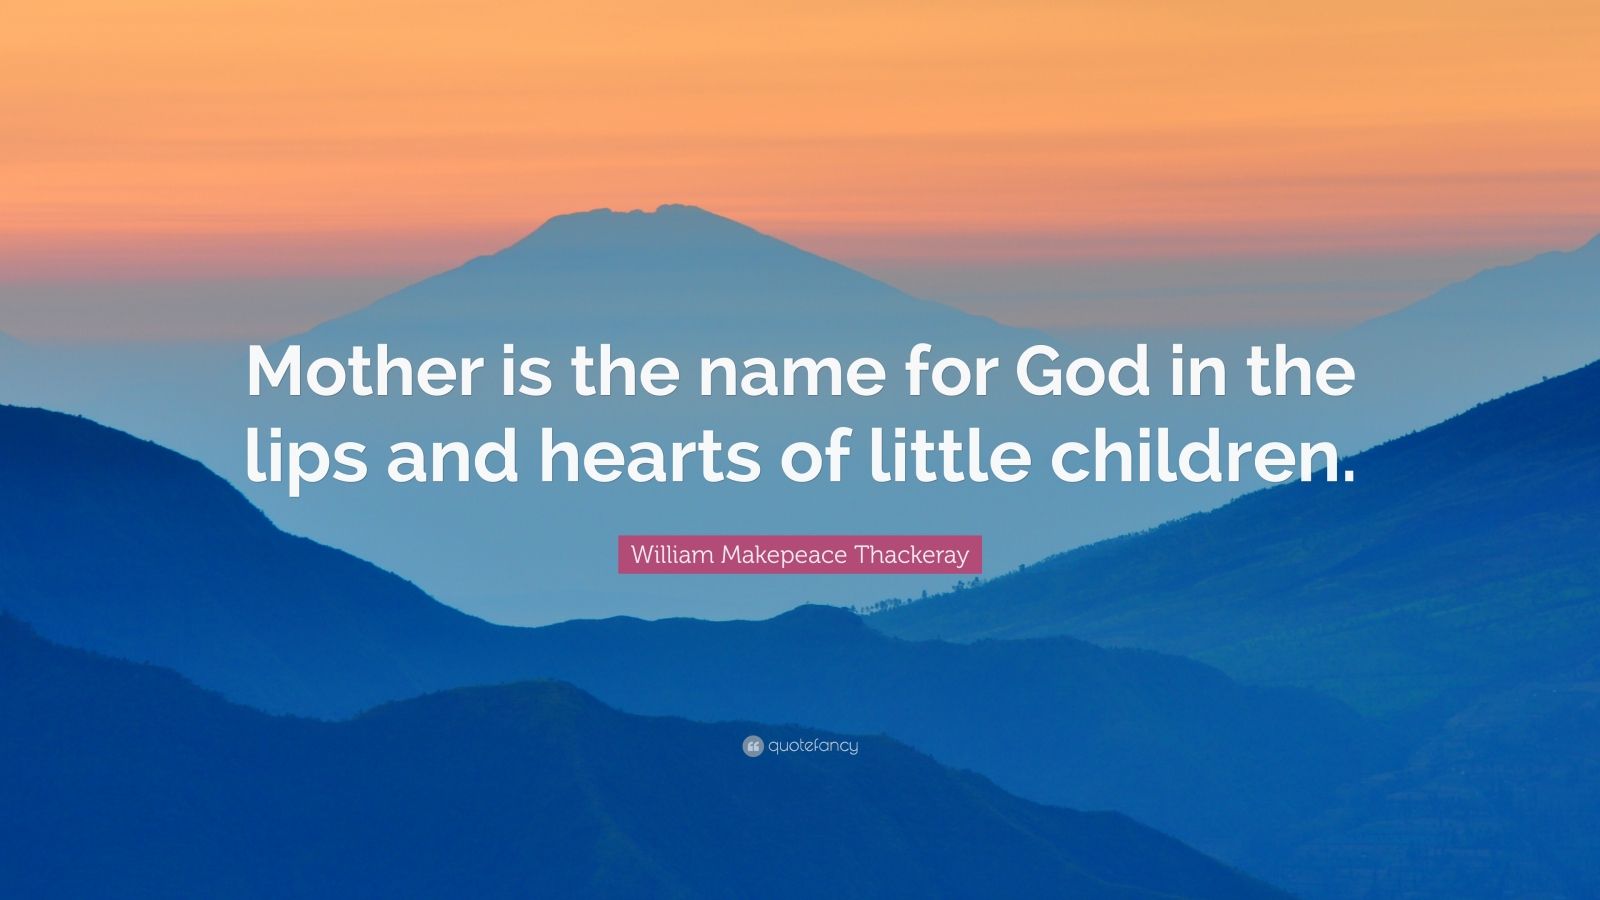 William Makepeace Thackeray Quote: “Mother is the name for God in the ...